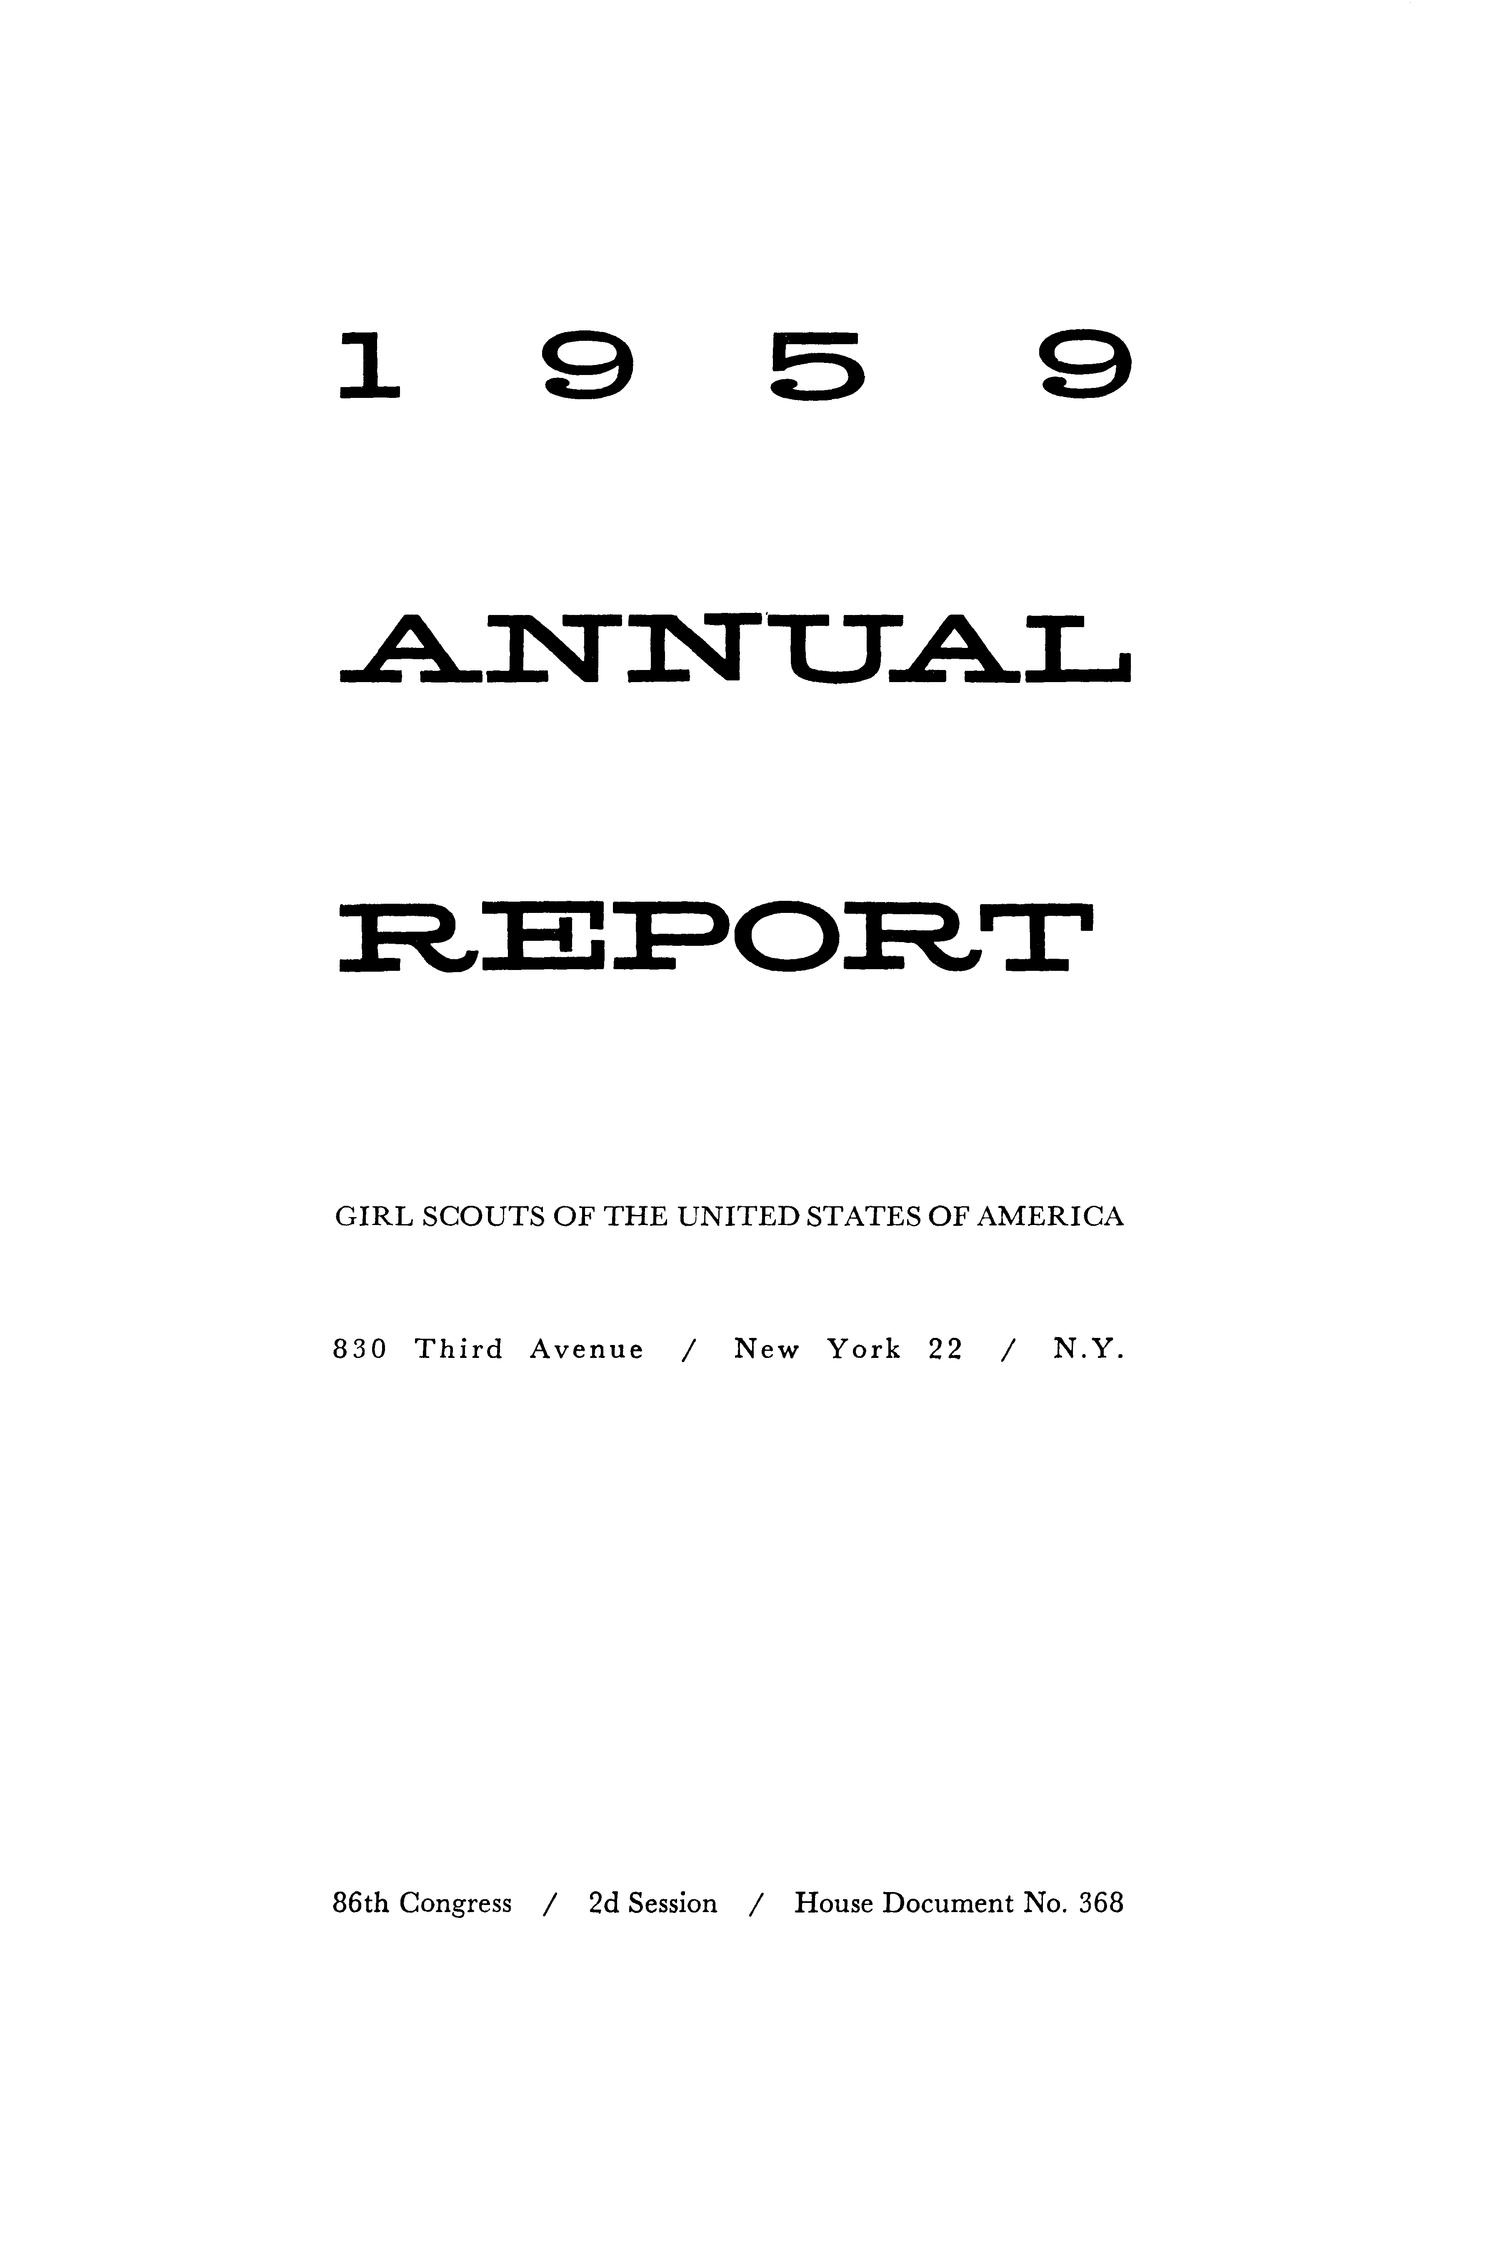 annual-report-of-the-girl-scouts-of-the-united-states-of-america-1959